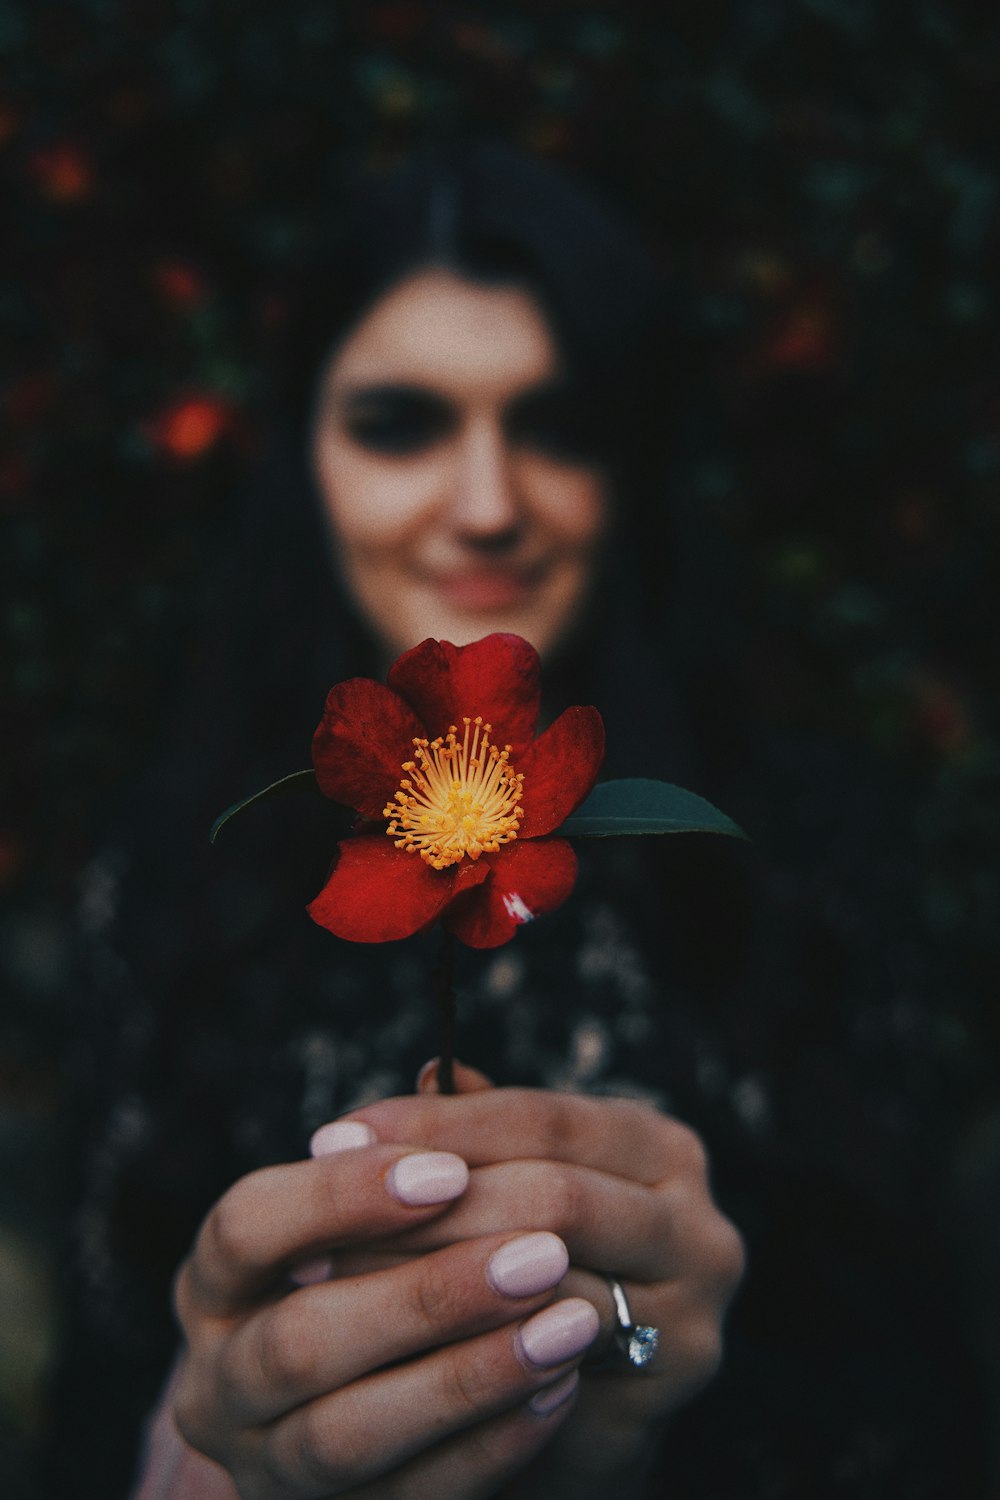 woman holding red flower in close up photography